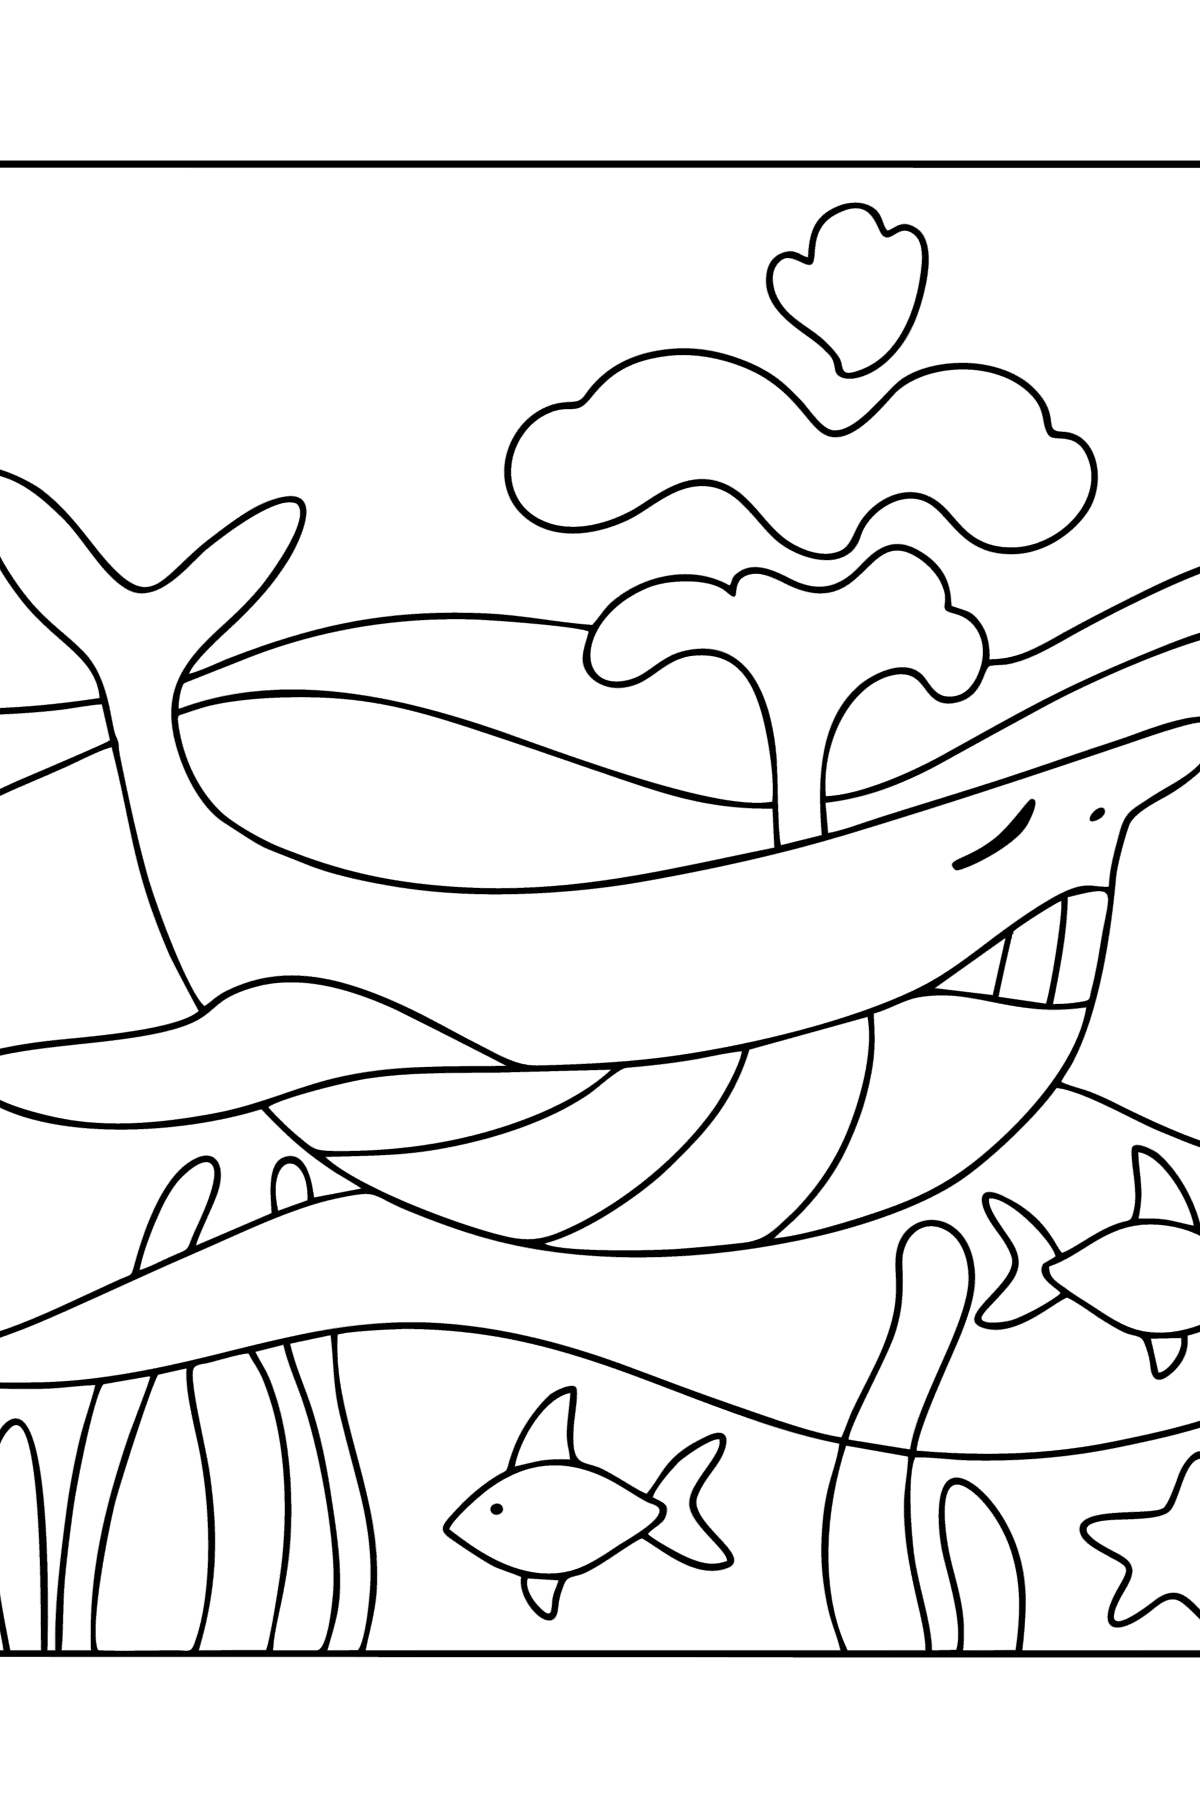 Cute sperm whale coloring page - Coloring Pages for Kids